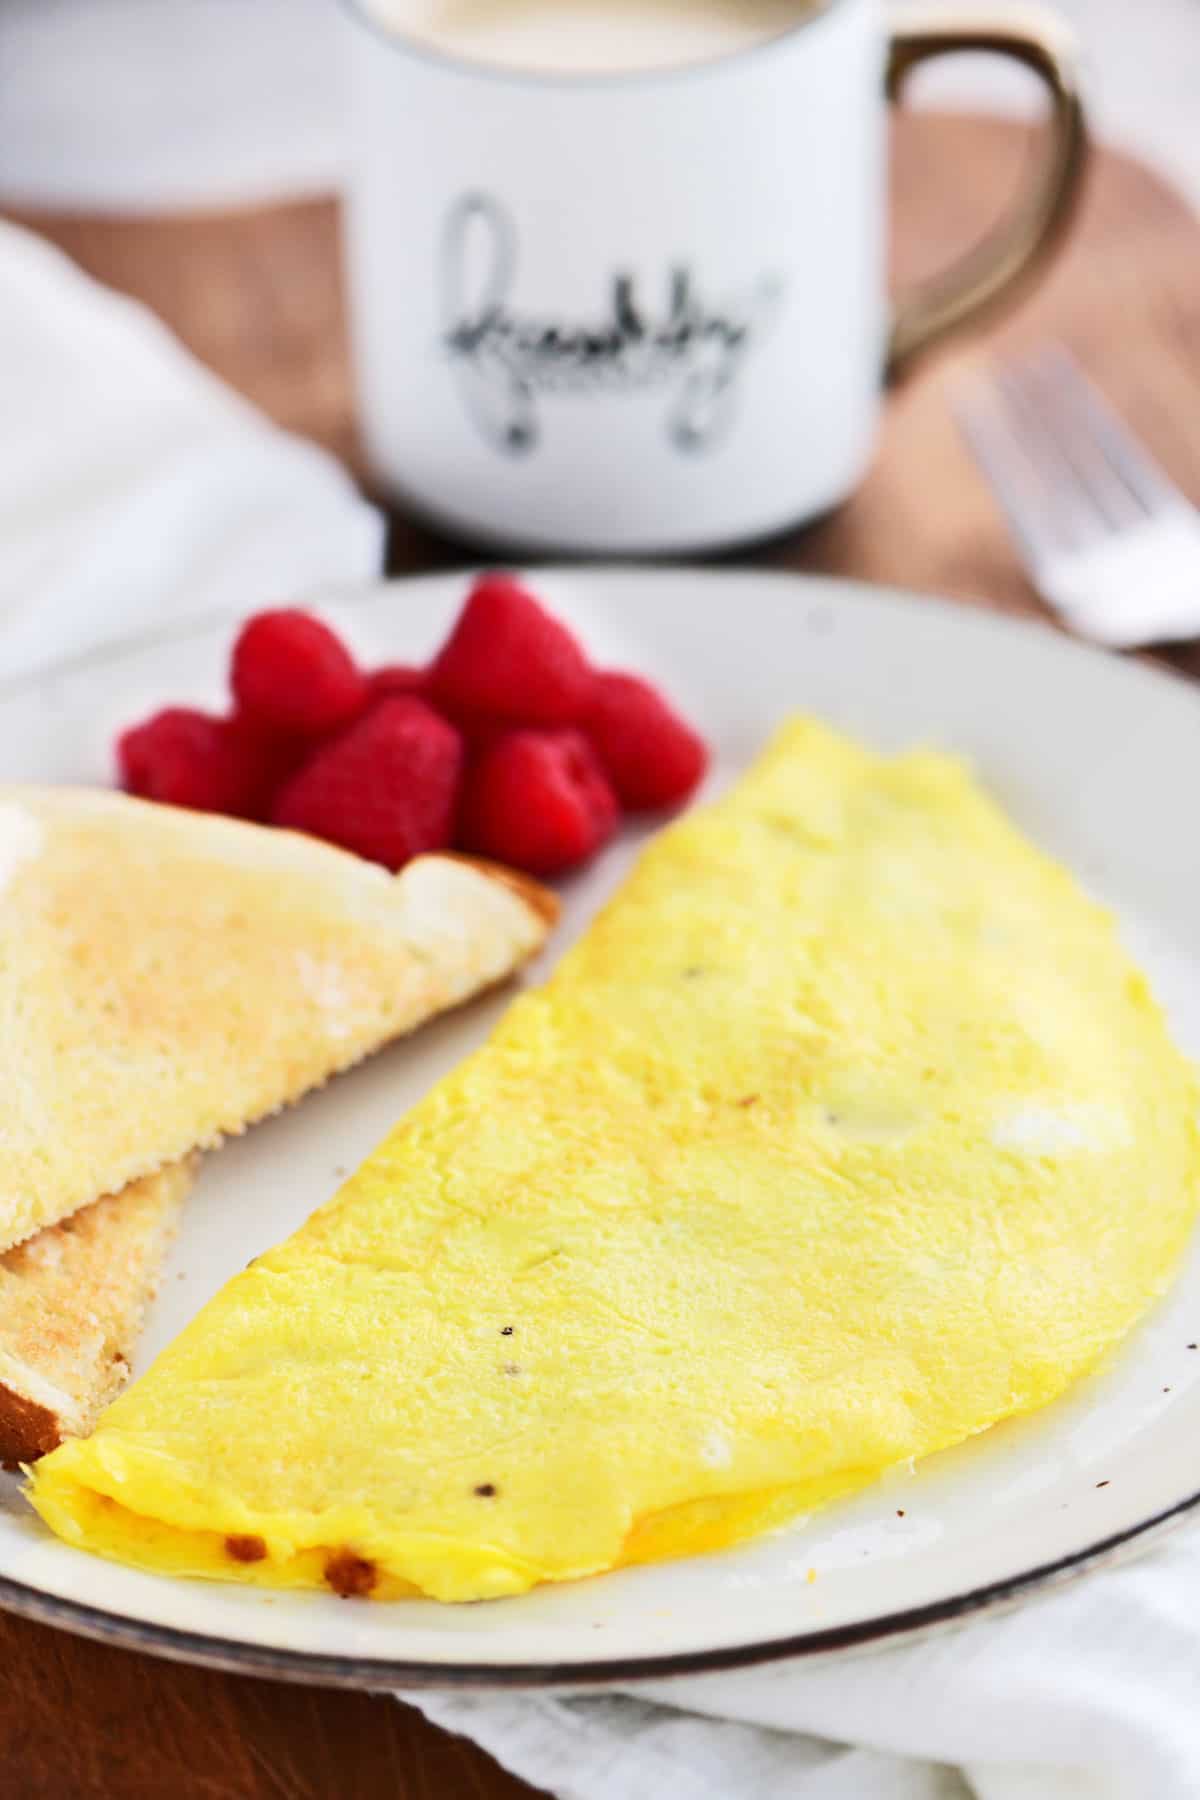 An Omelette with toast and berries.